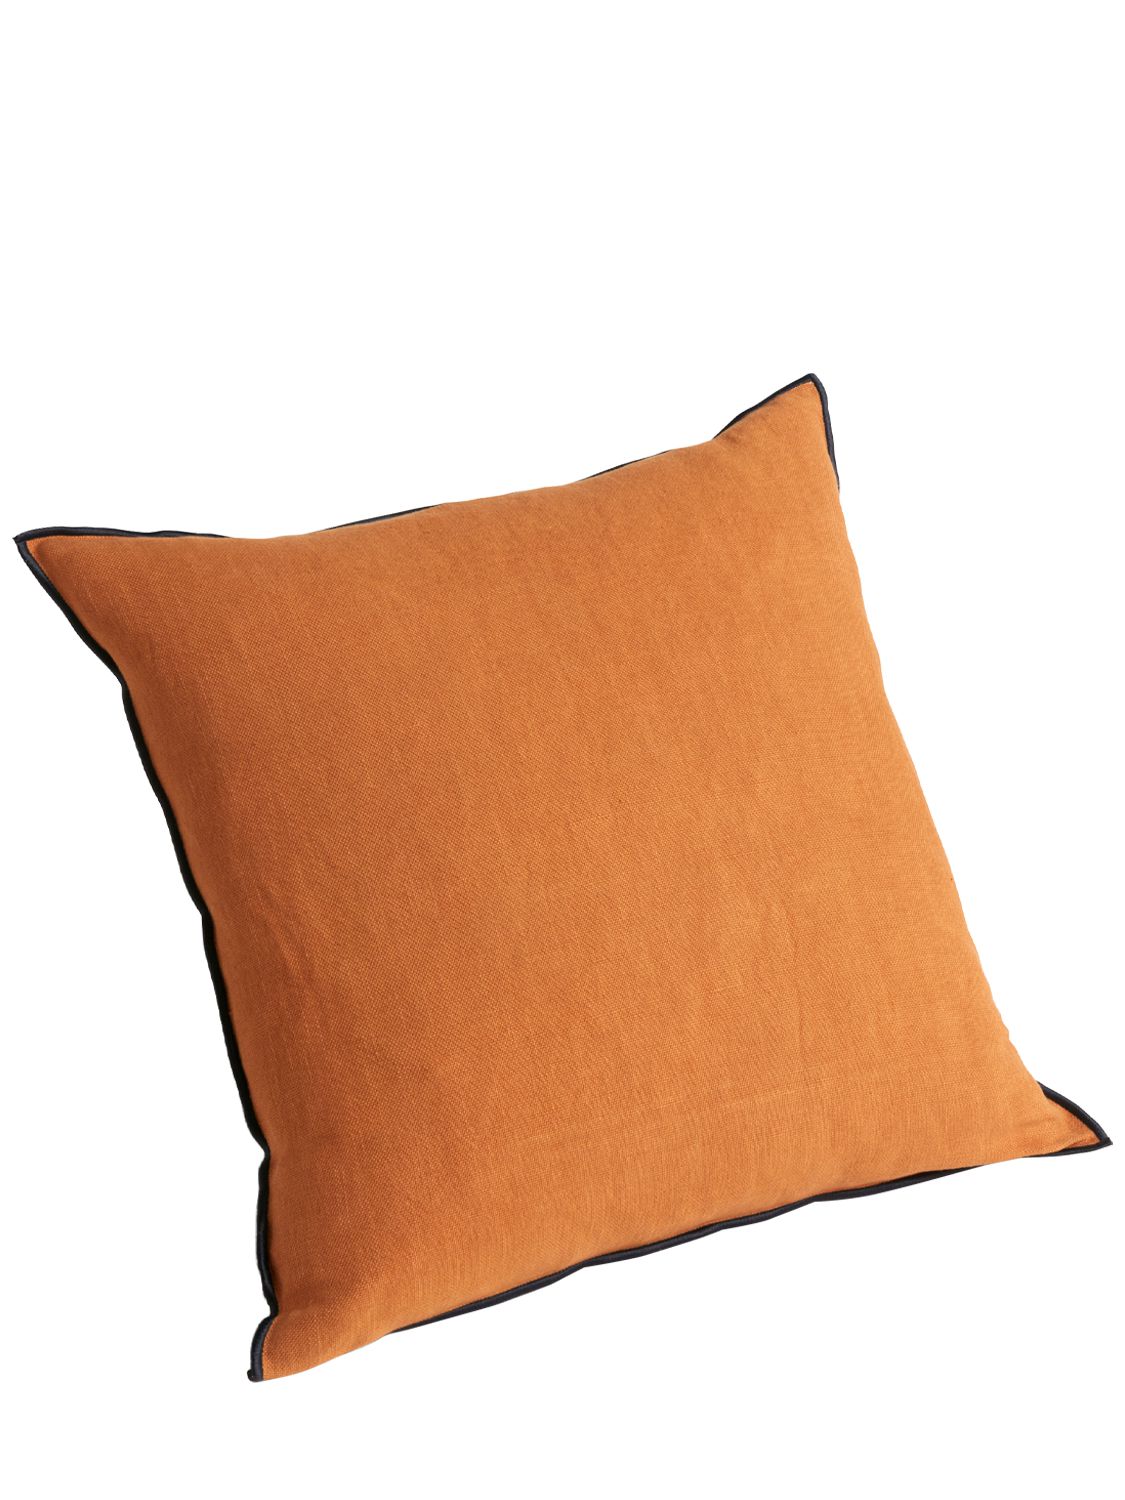 Hay Outline Cushion In Brown